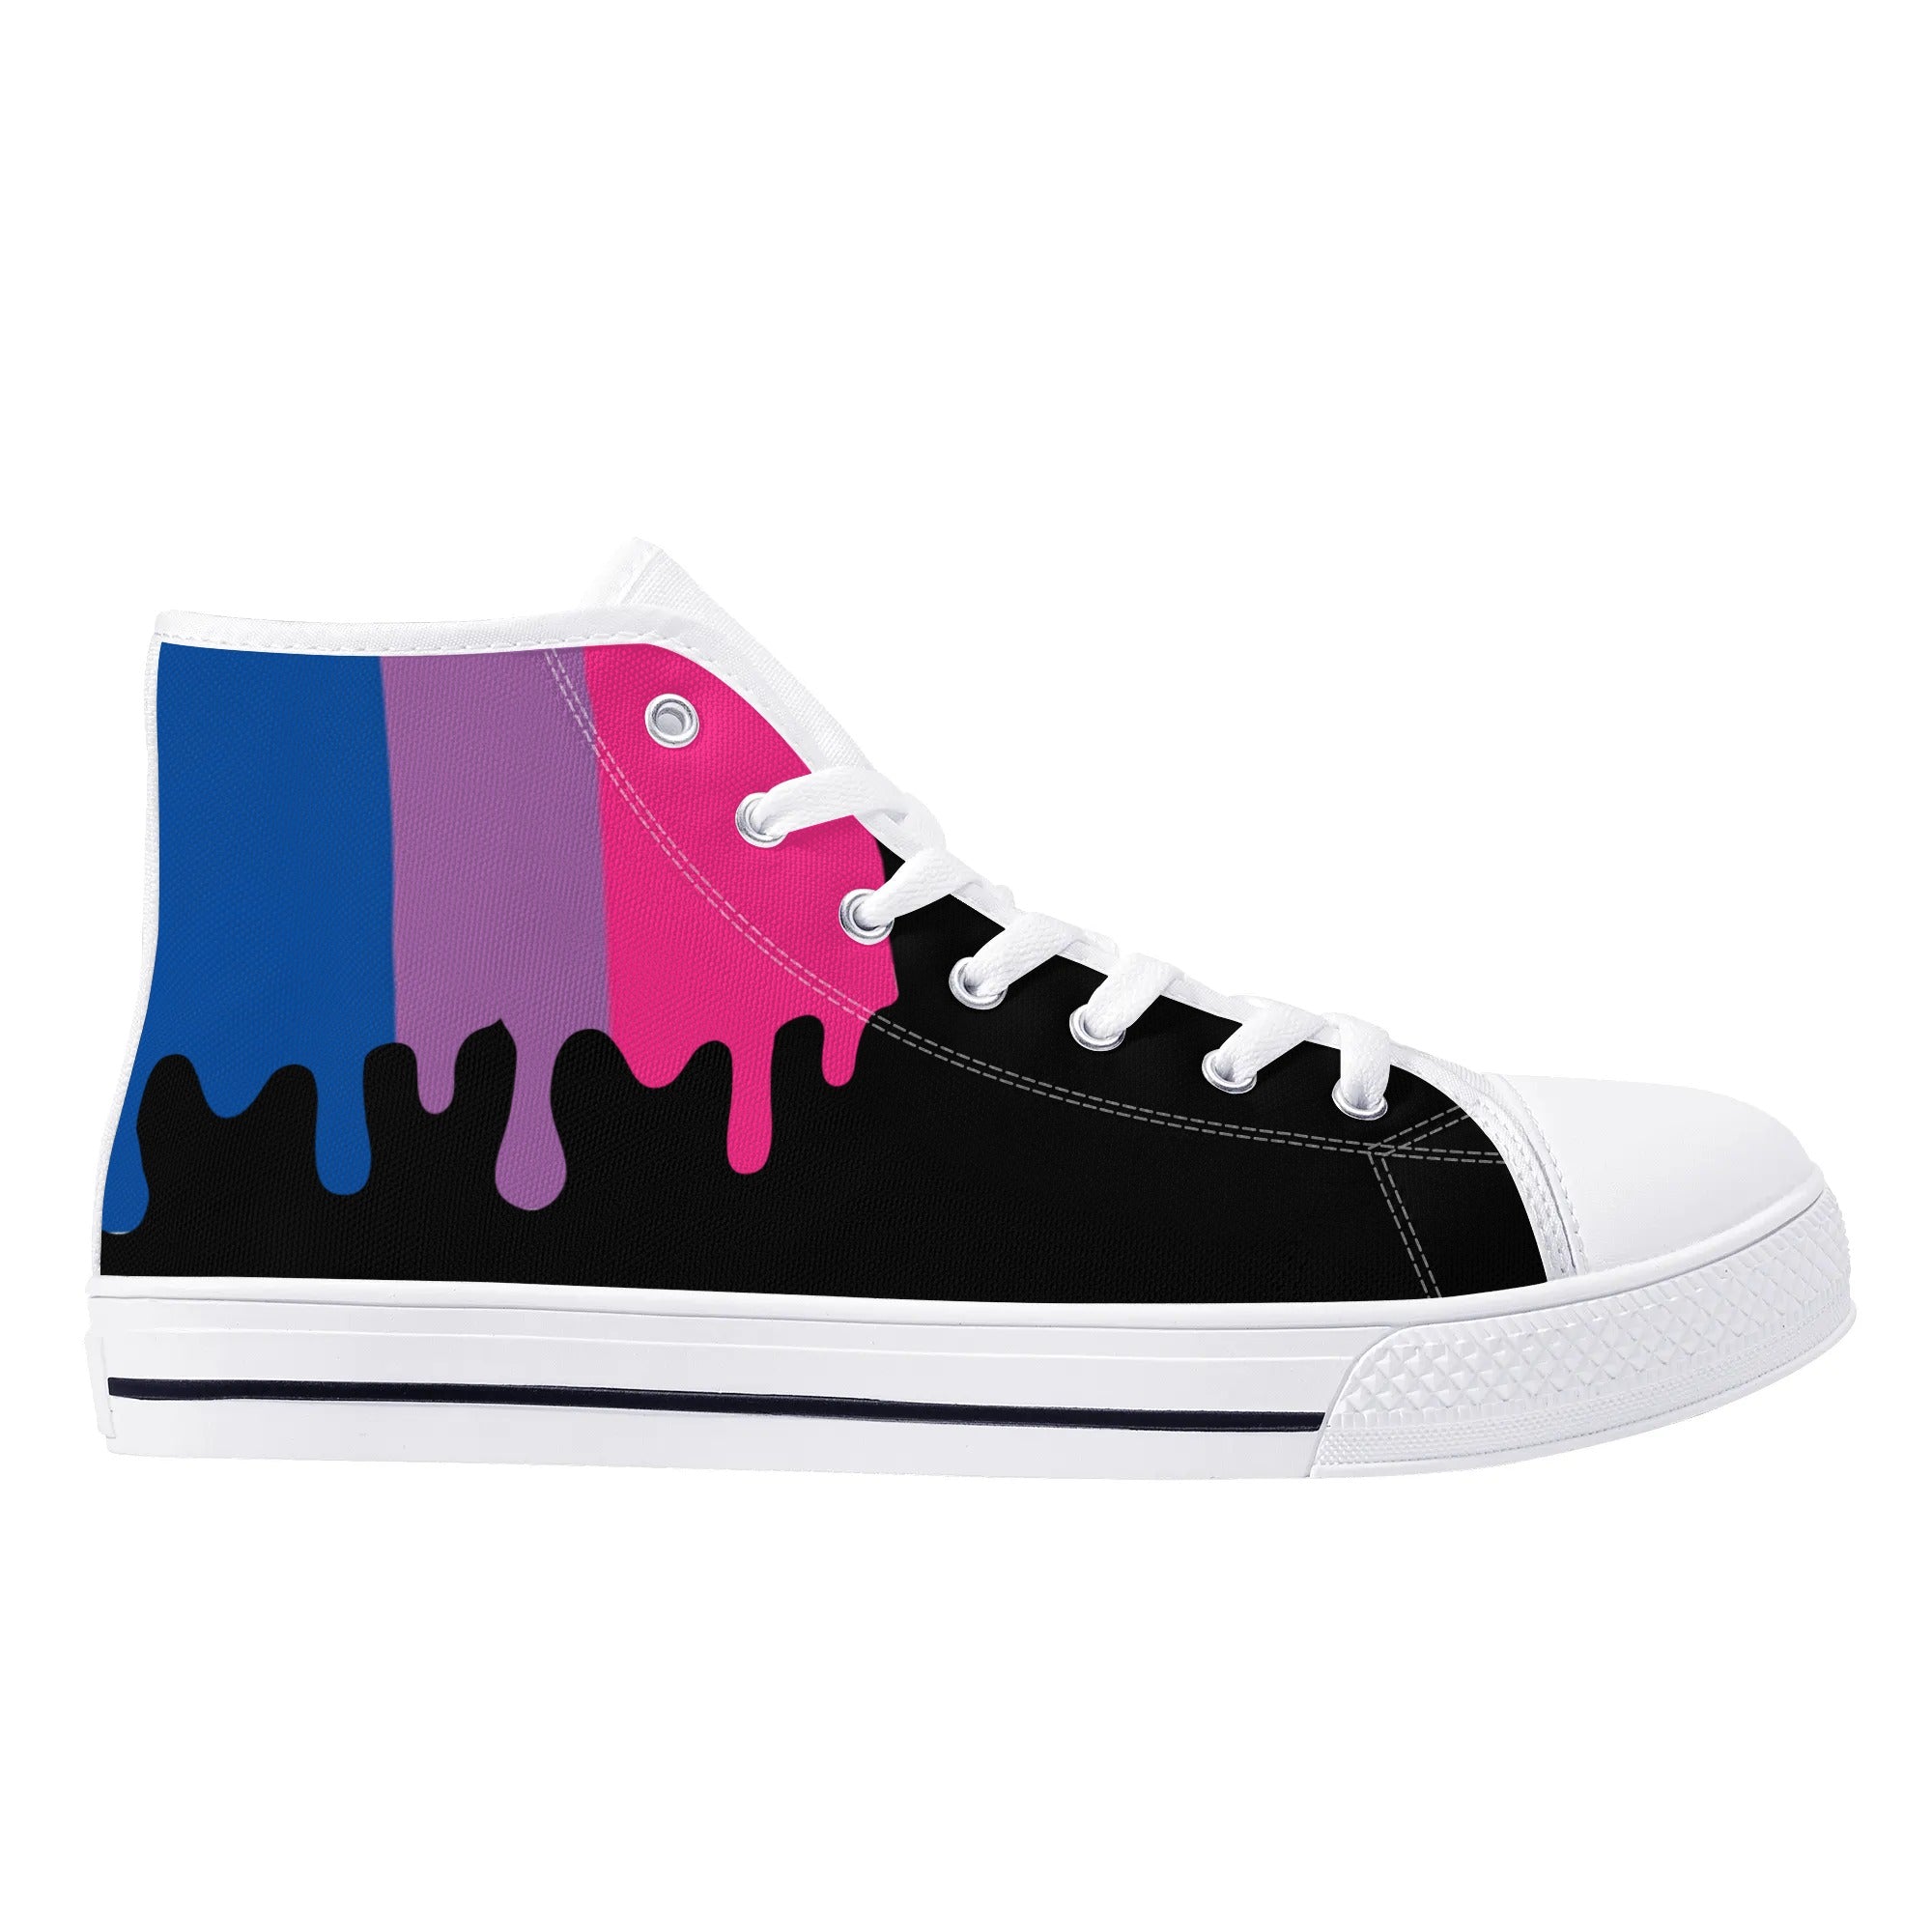 Women's Bisexual Pride Sneakers - Rose Gold Co. Shop